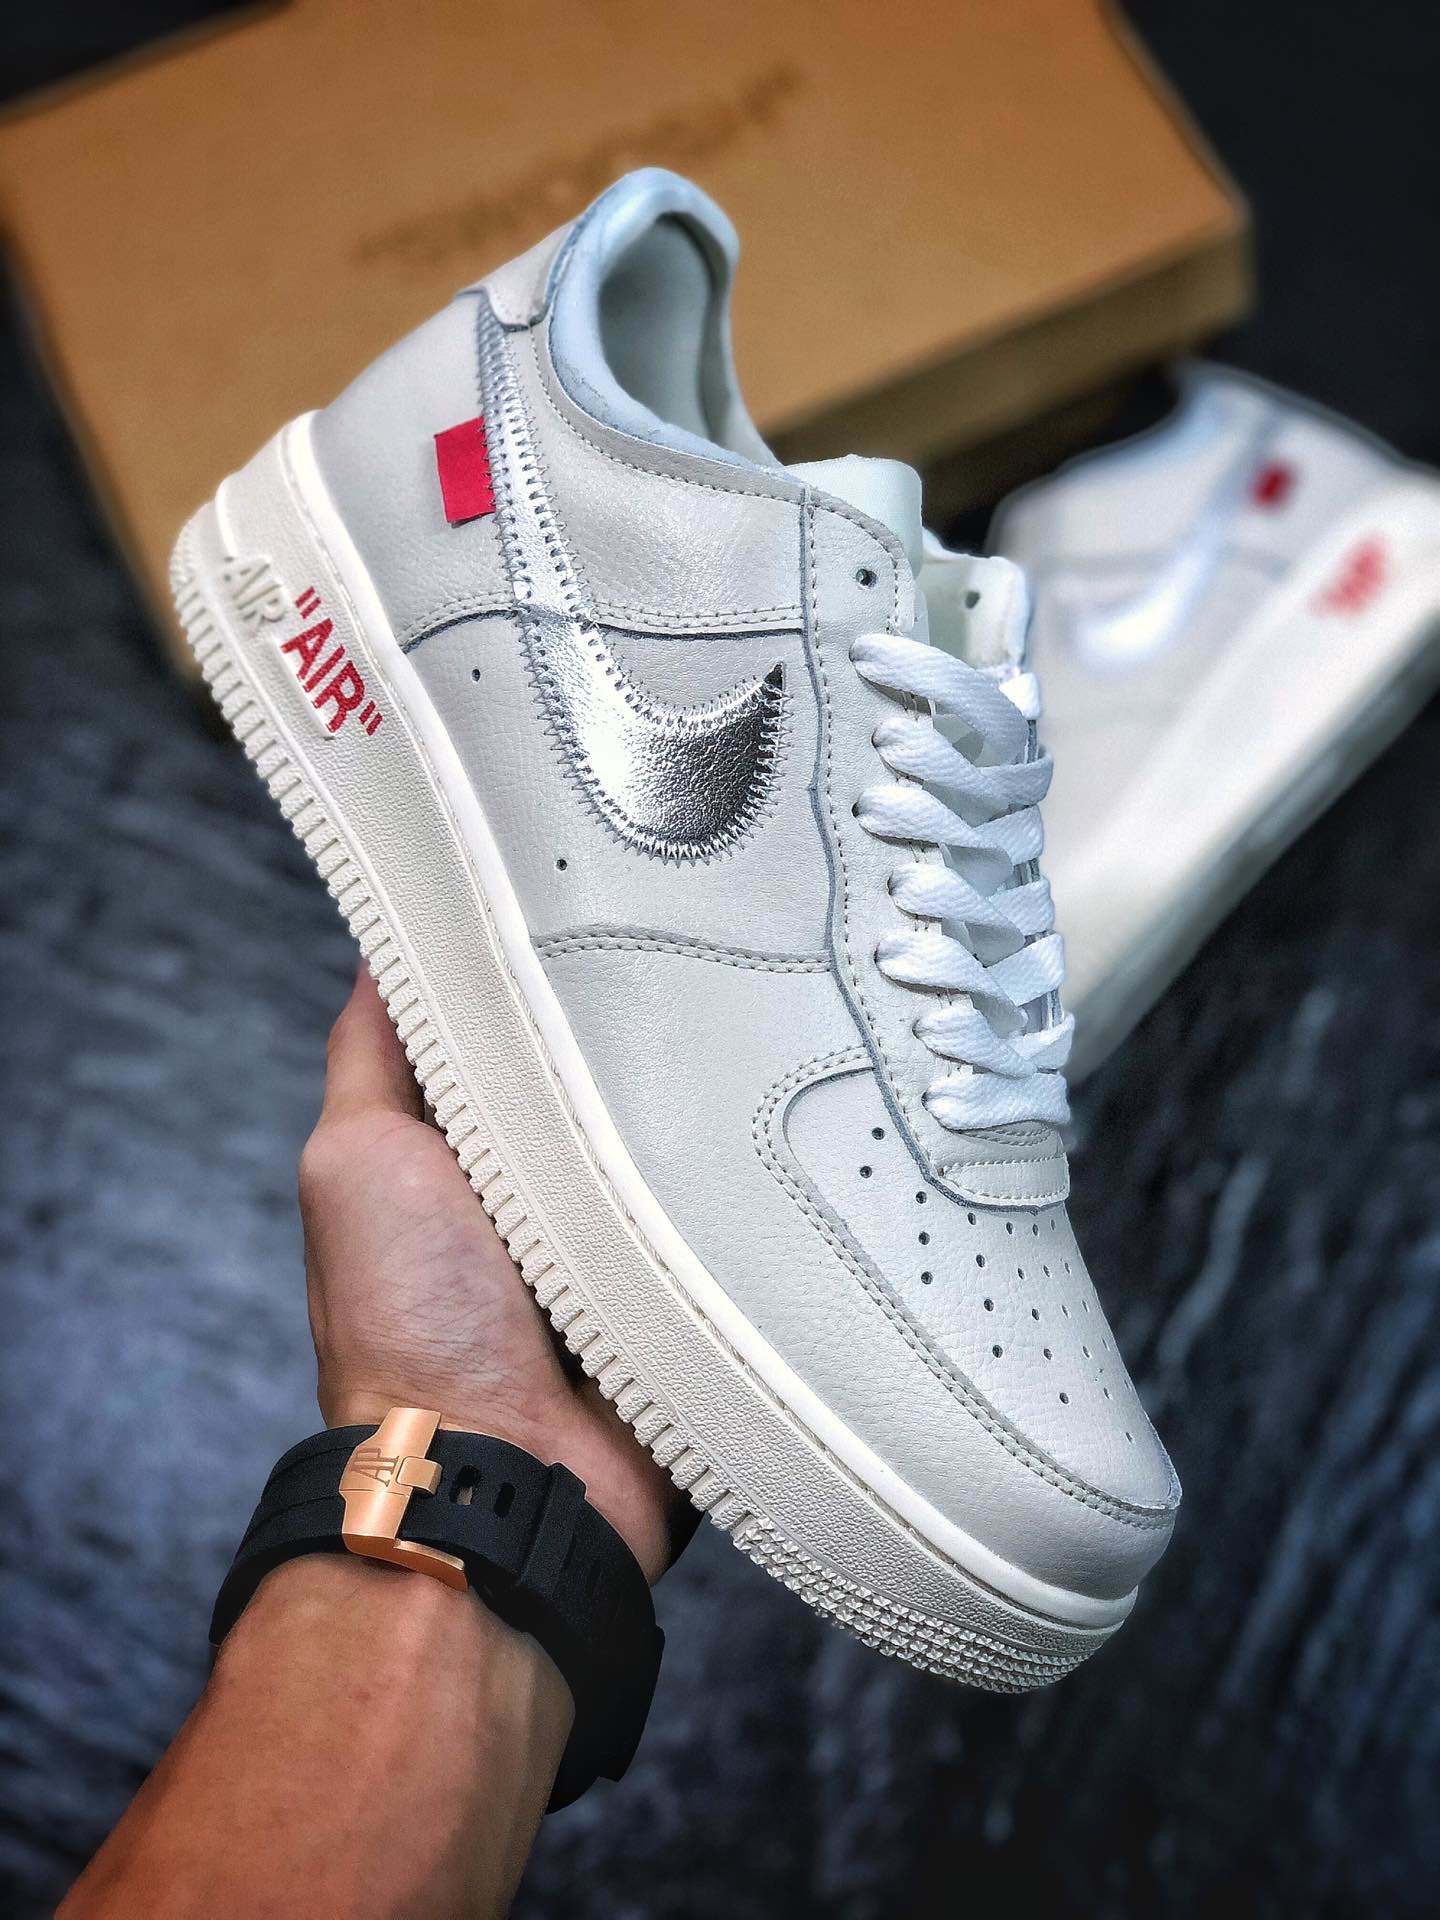 air force 1 skateboard shoes